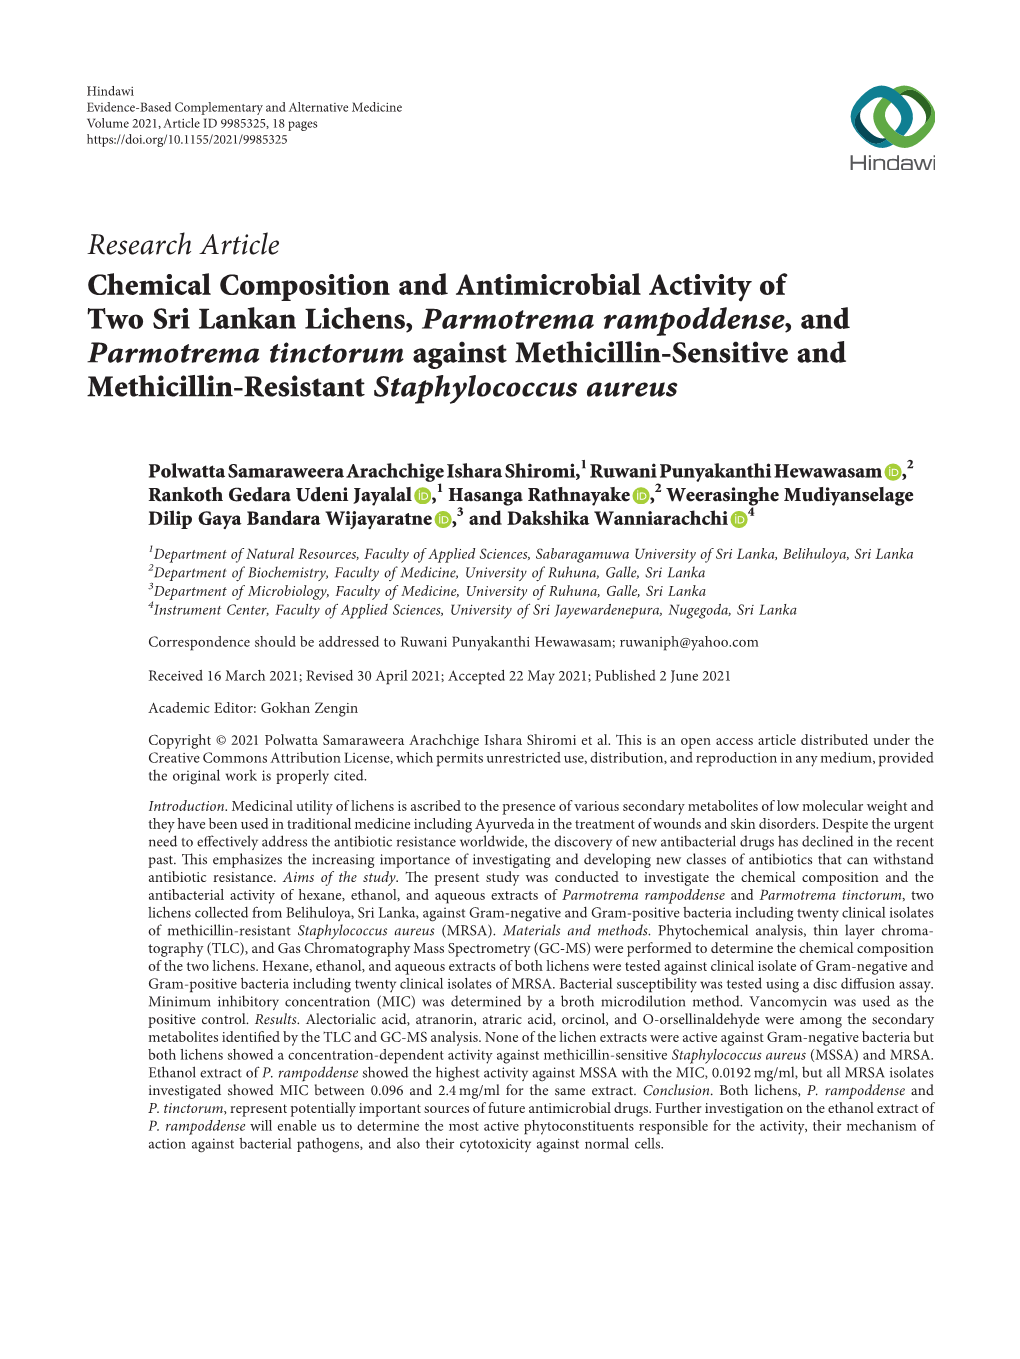 Chemical Composition and Antimicrobial Activity of Two Sri